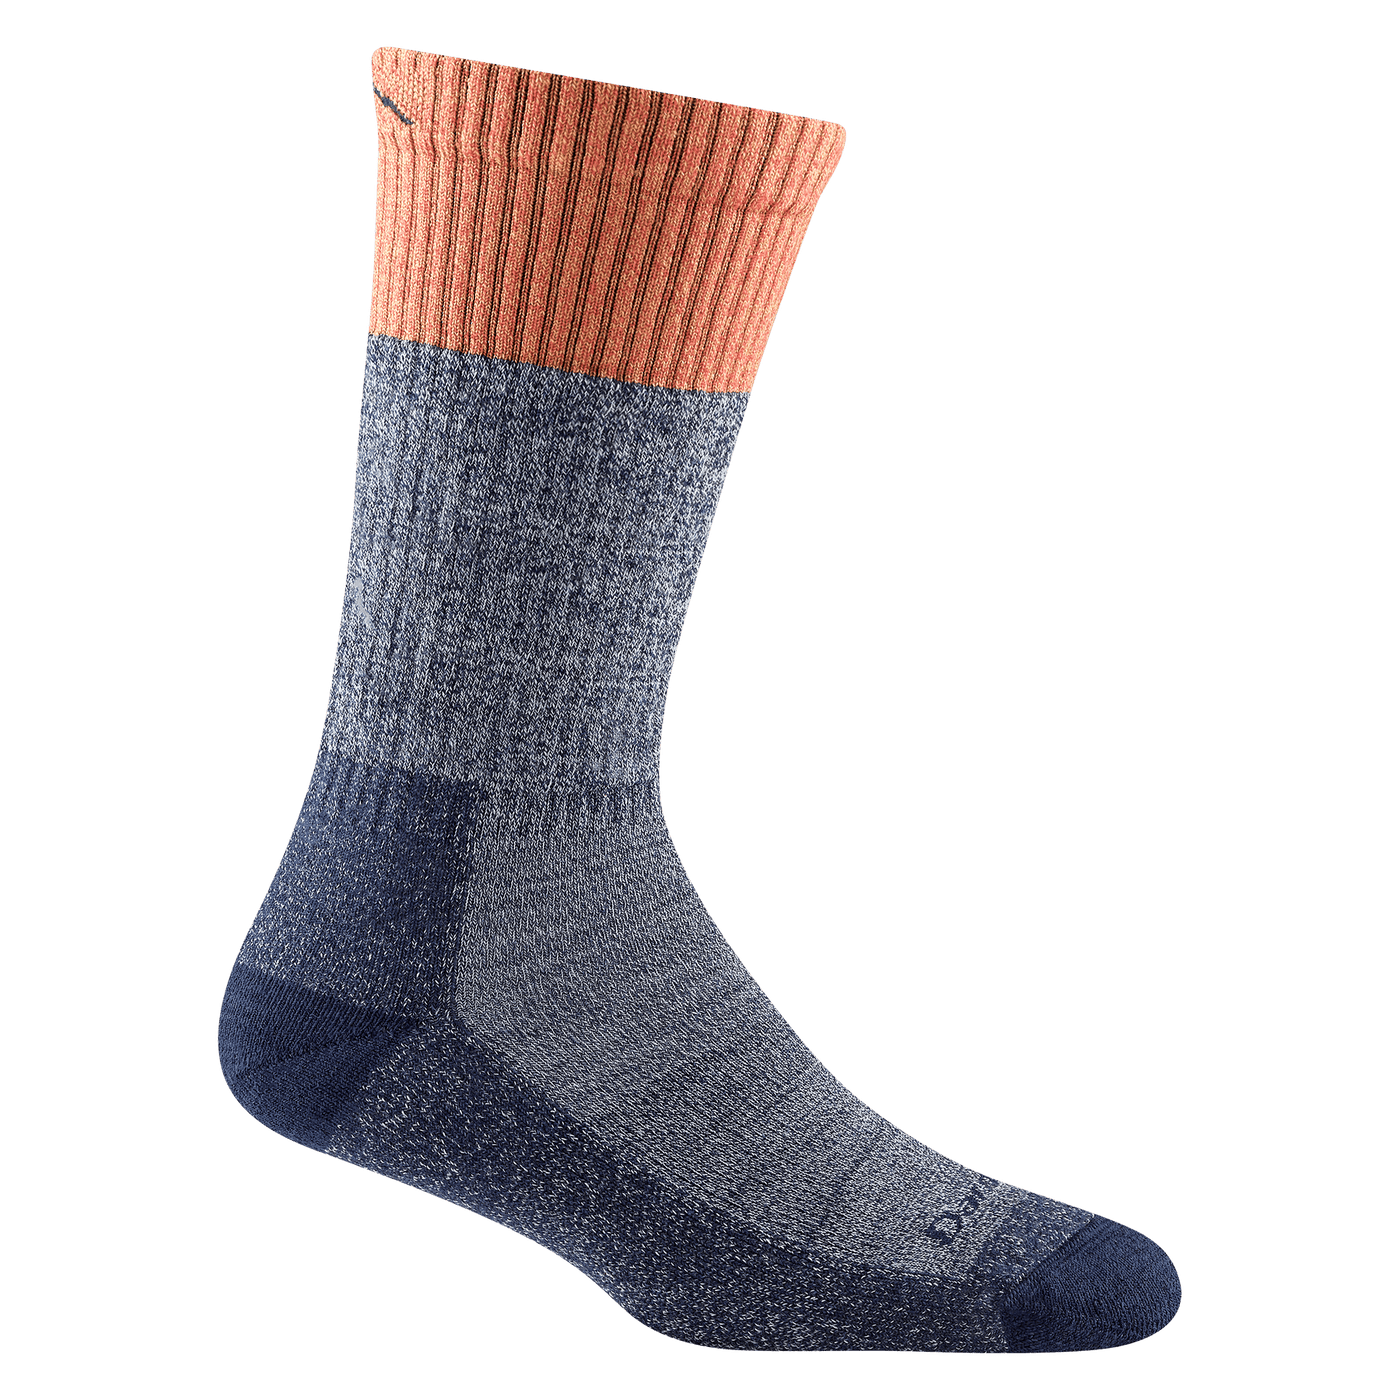 Scout, Women's Midweight Boot Sock with Cushion #1983 - Darn Tough - The Sock Monster